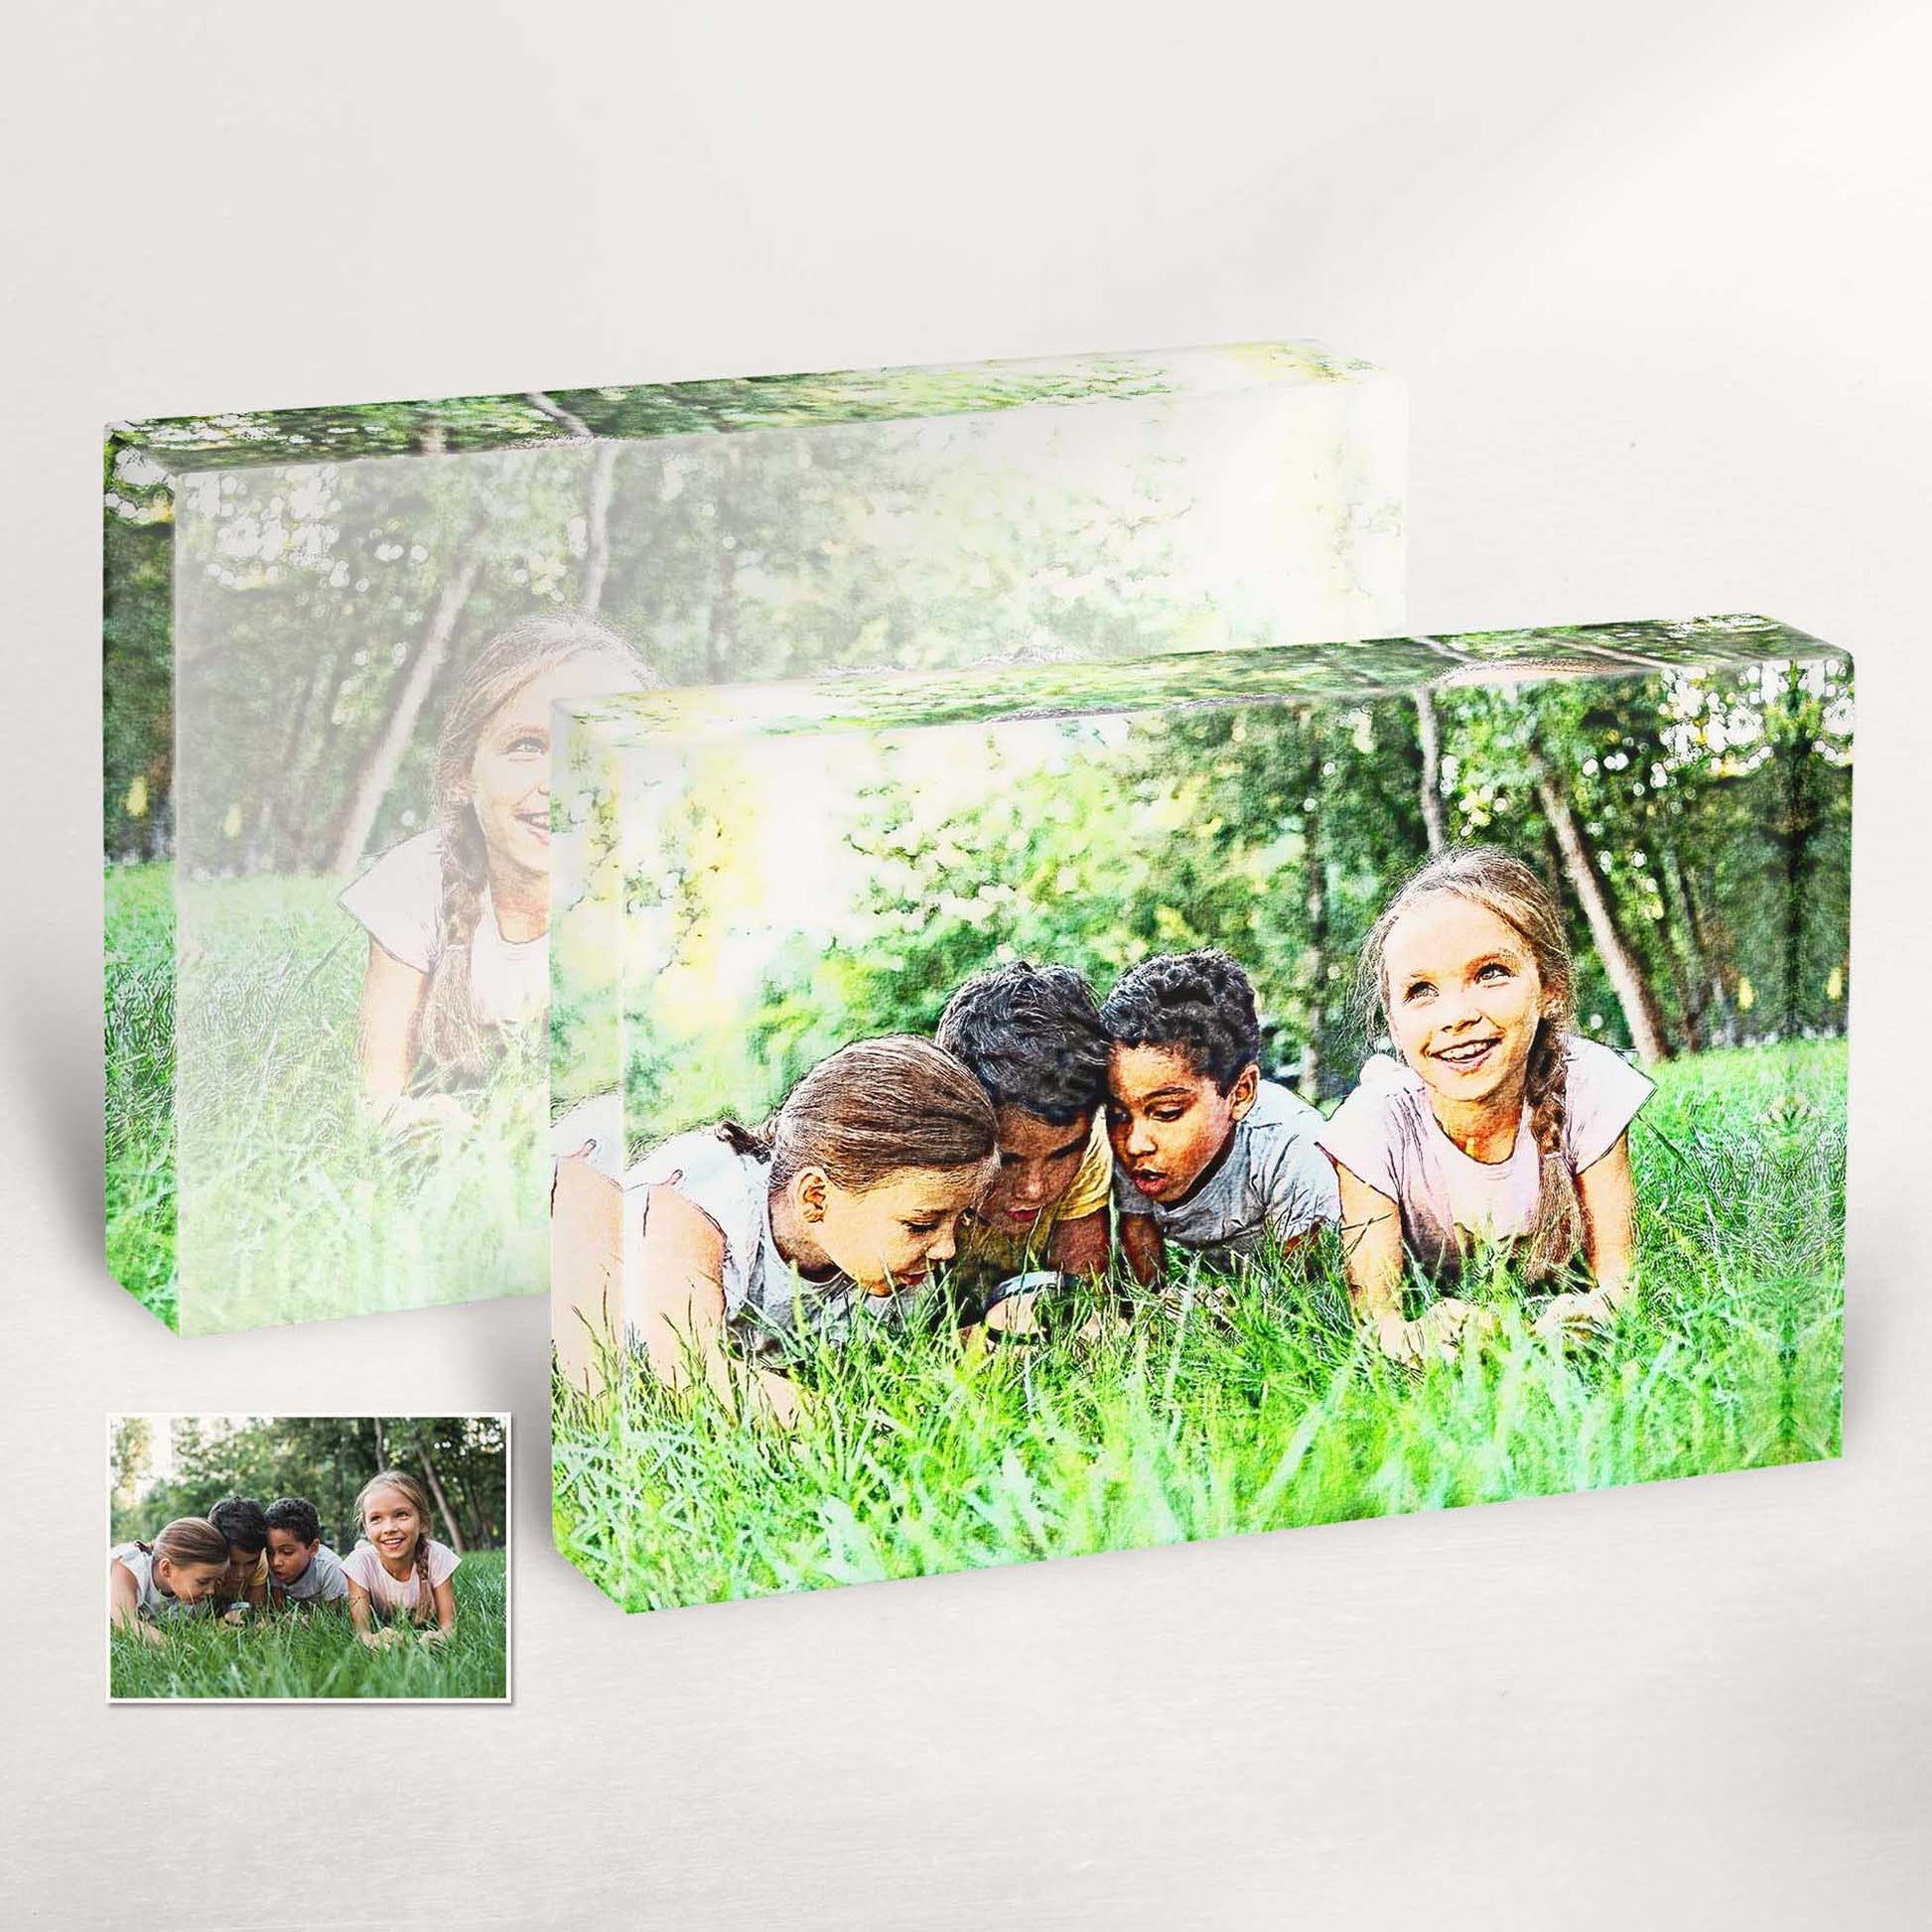 Immortalize your cherished moments with our Personalised Just Watercolor Effect Acrylic Block Photo. Transform your own photo into a stunning and original work of art that captures the ethereal beauty of watercolor